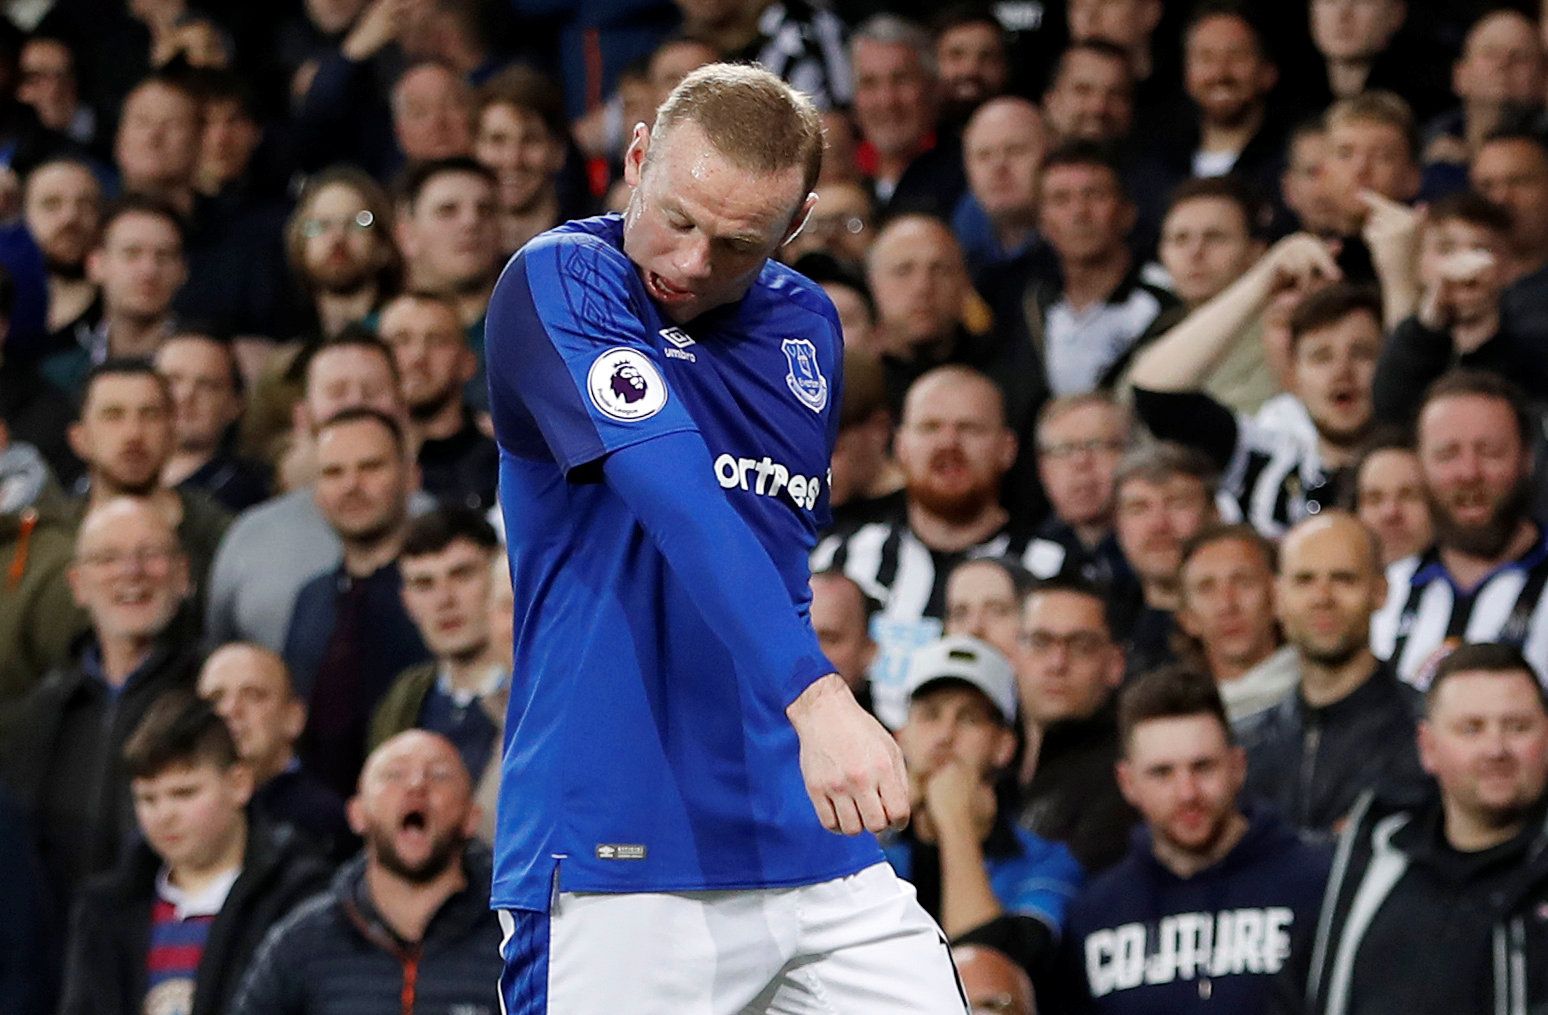 Soccer Football - Premier League - Everton v Newcastle United - Goodison Park, Liverpool, Britain - April 23, 2018   Newcastle United fans and Everton's Wayne Rooney     Action Images via Reuters/Lee Smith    EDITORIAL USE ONLY. No use with unauthorized audio, video, data, fixture lists, club/league logos or 